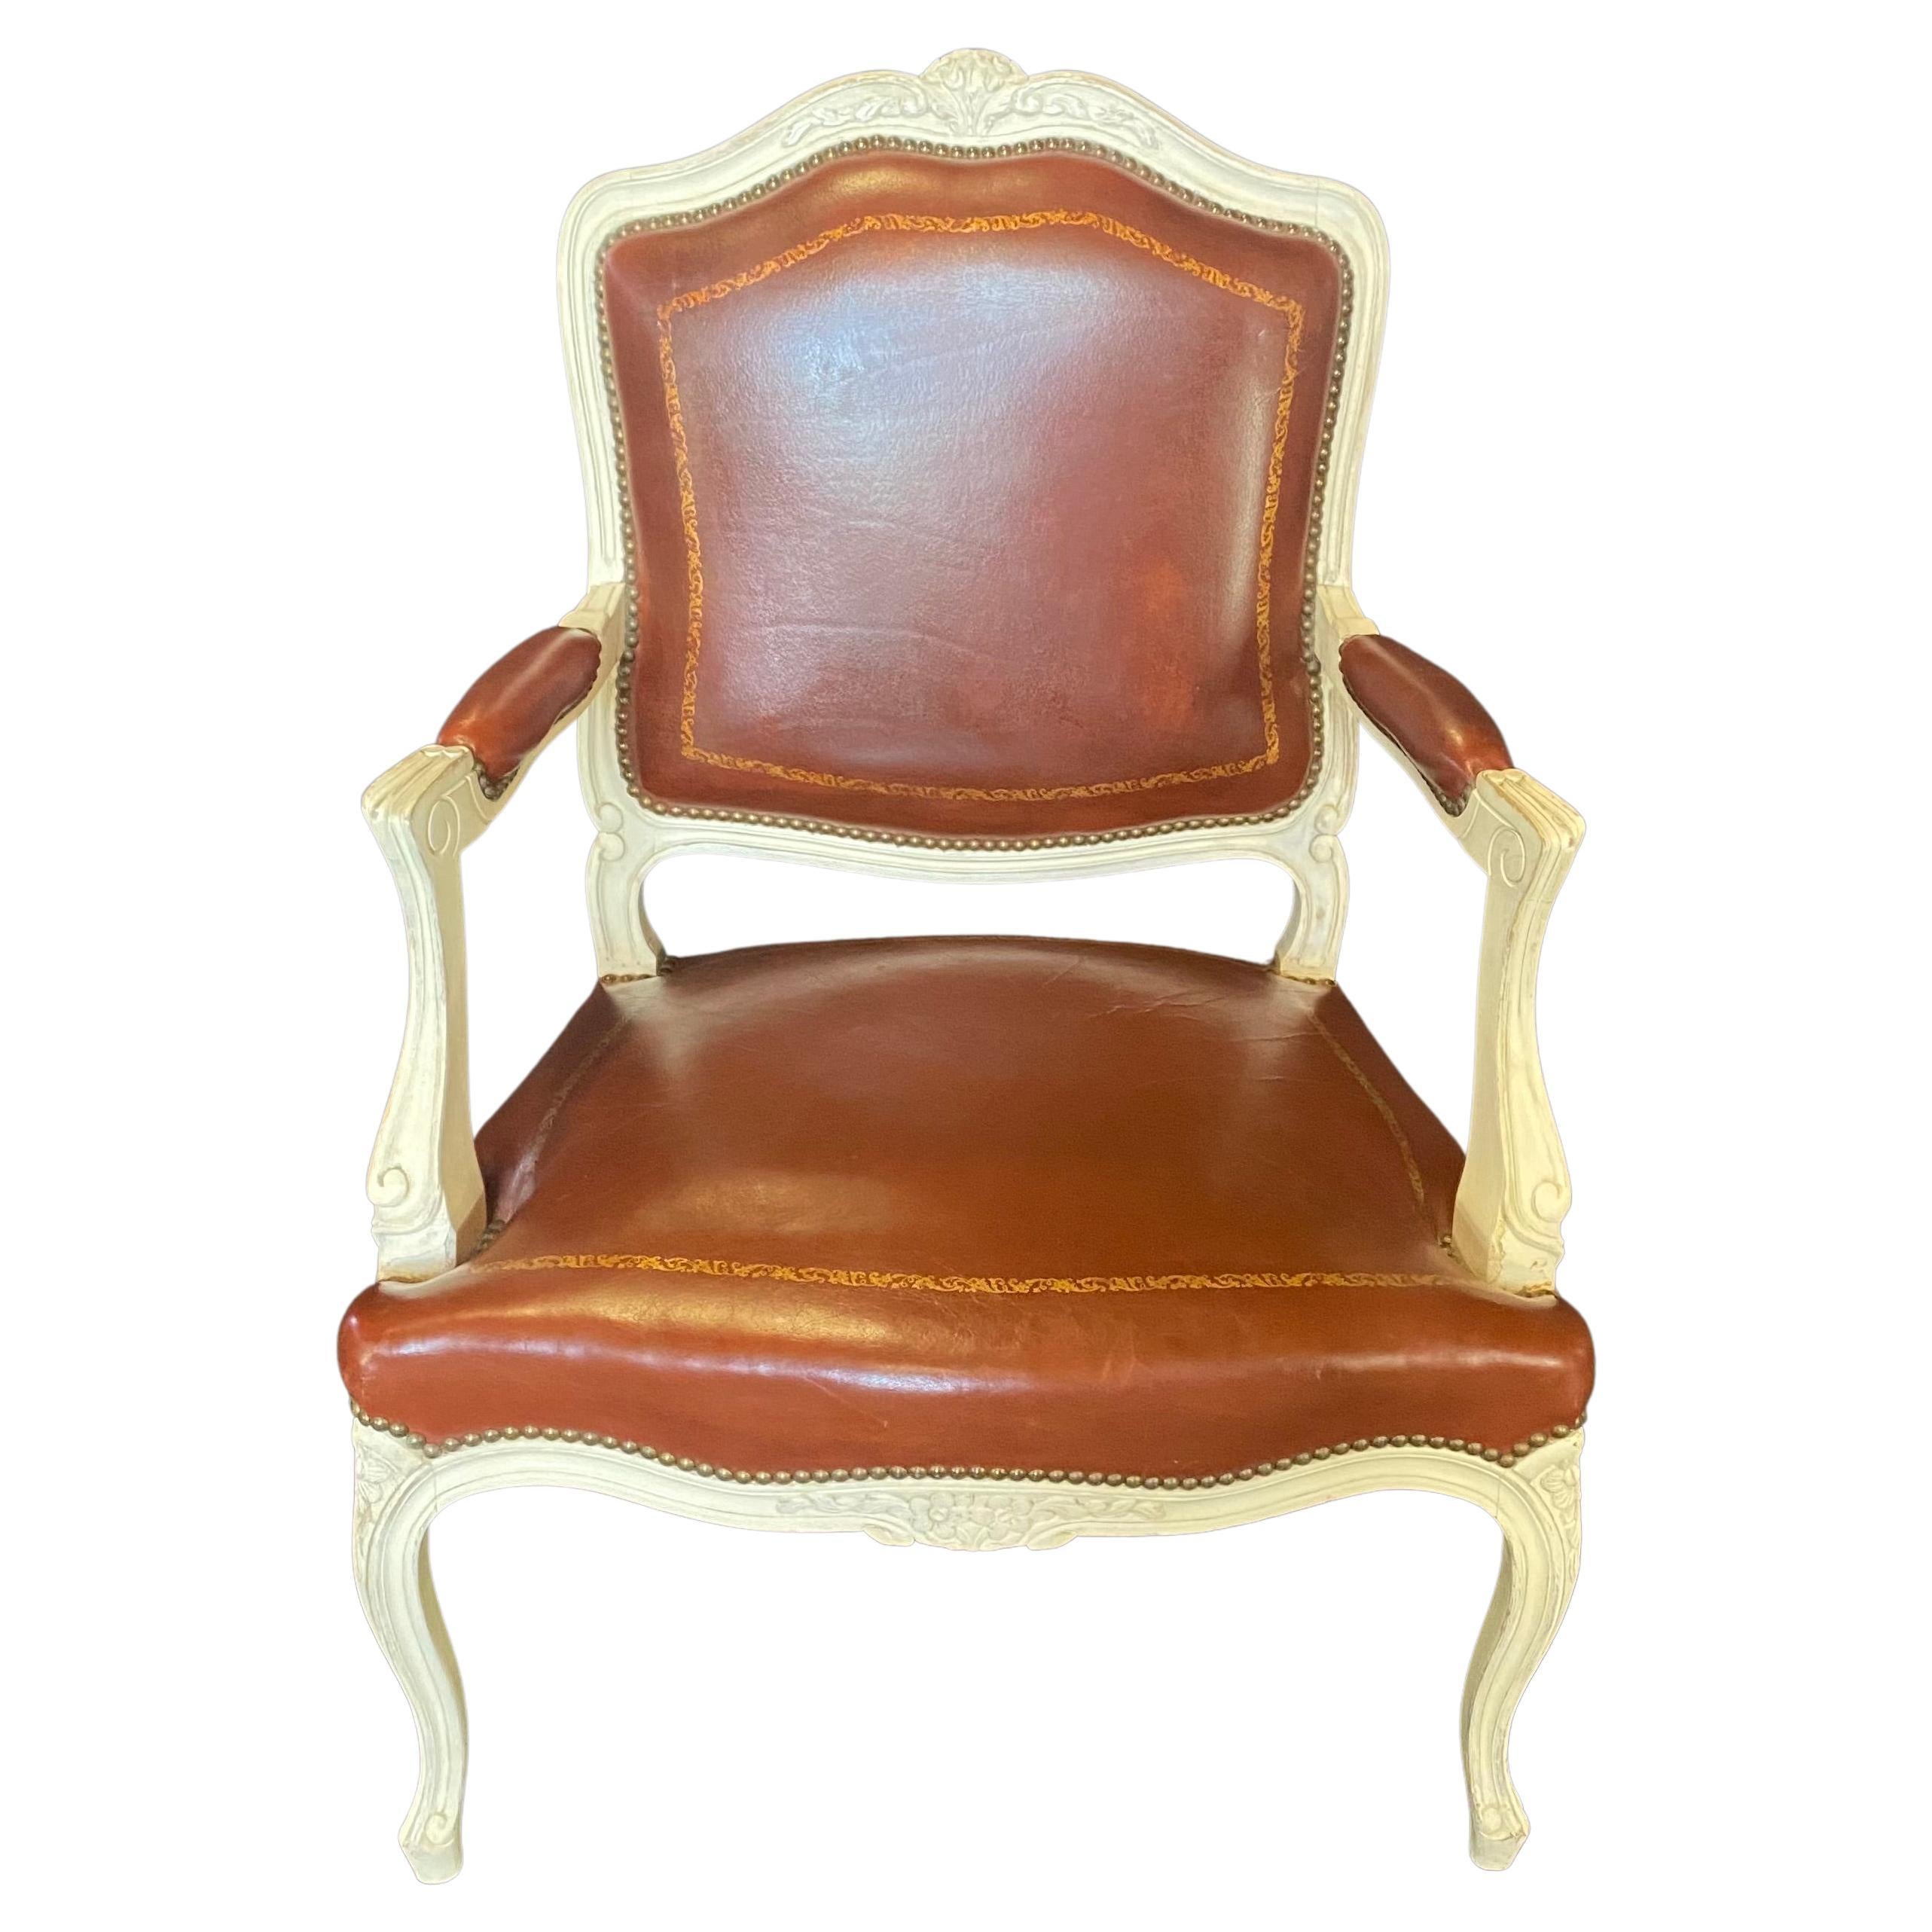 Luscious pair of leather embossed armchairs or fauteuils. Can be used as elegant dining chairs at the head of a table, or armchairs in the livingroom or study. Ivory painted carved walnut provides a lovely background for the embossed brown leather